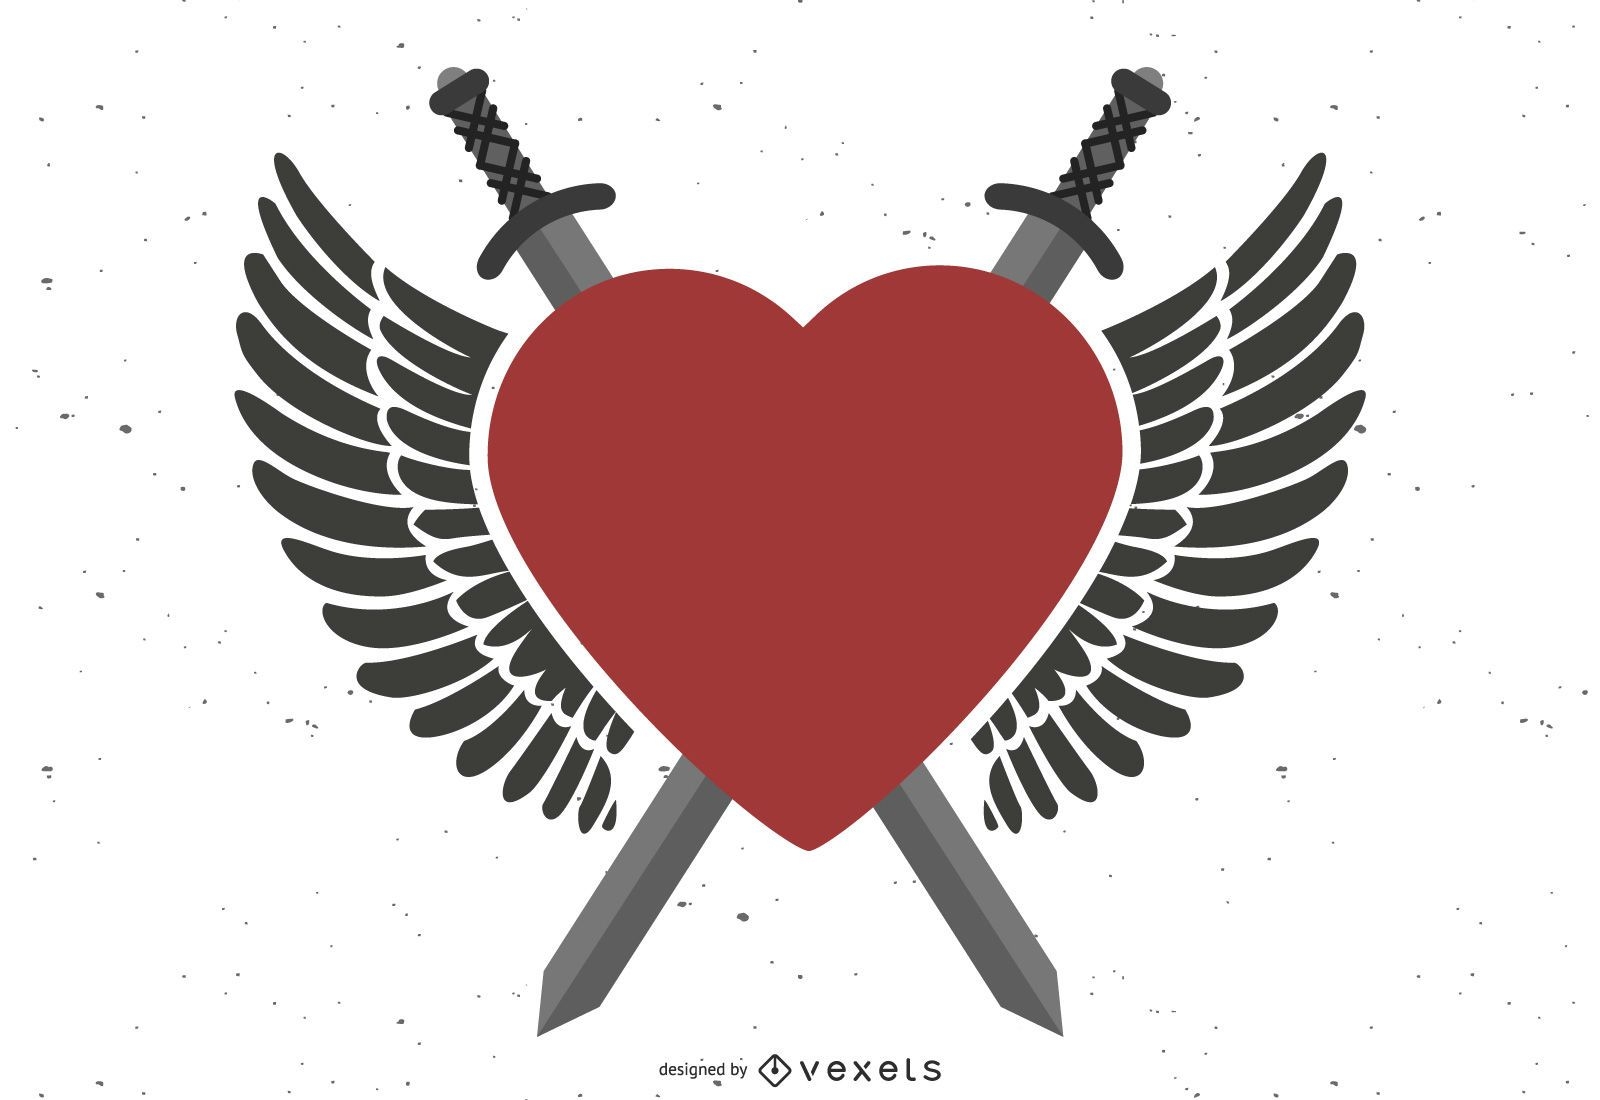 Mighted Winged Heart Crossed Swords